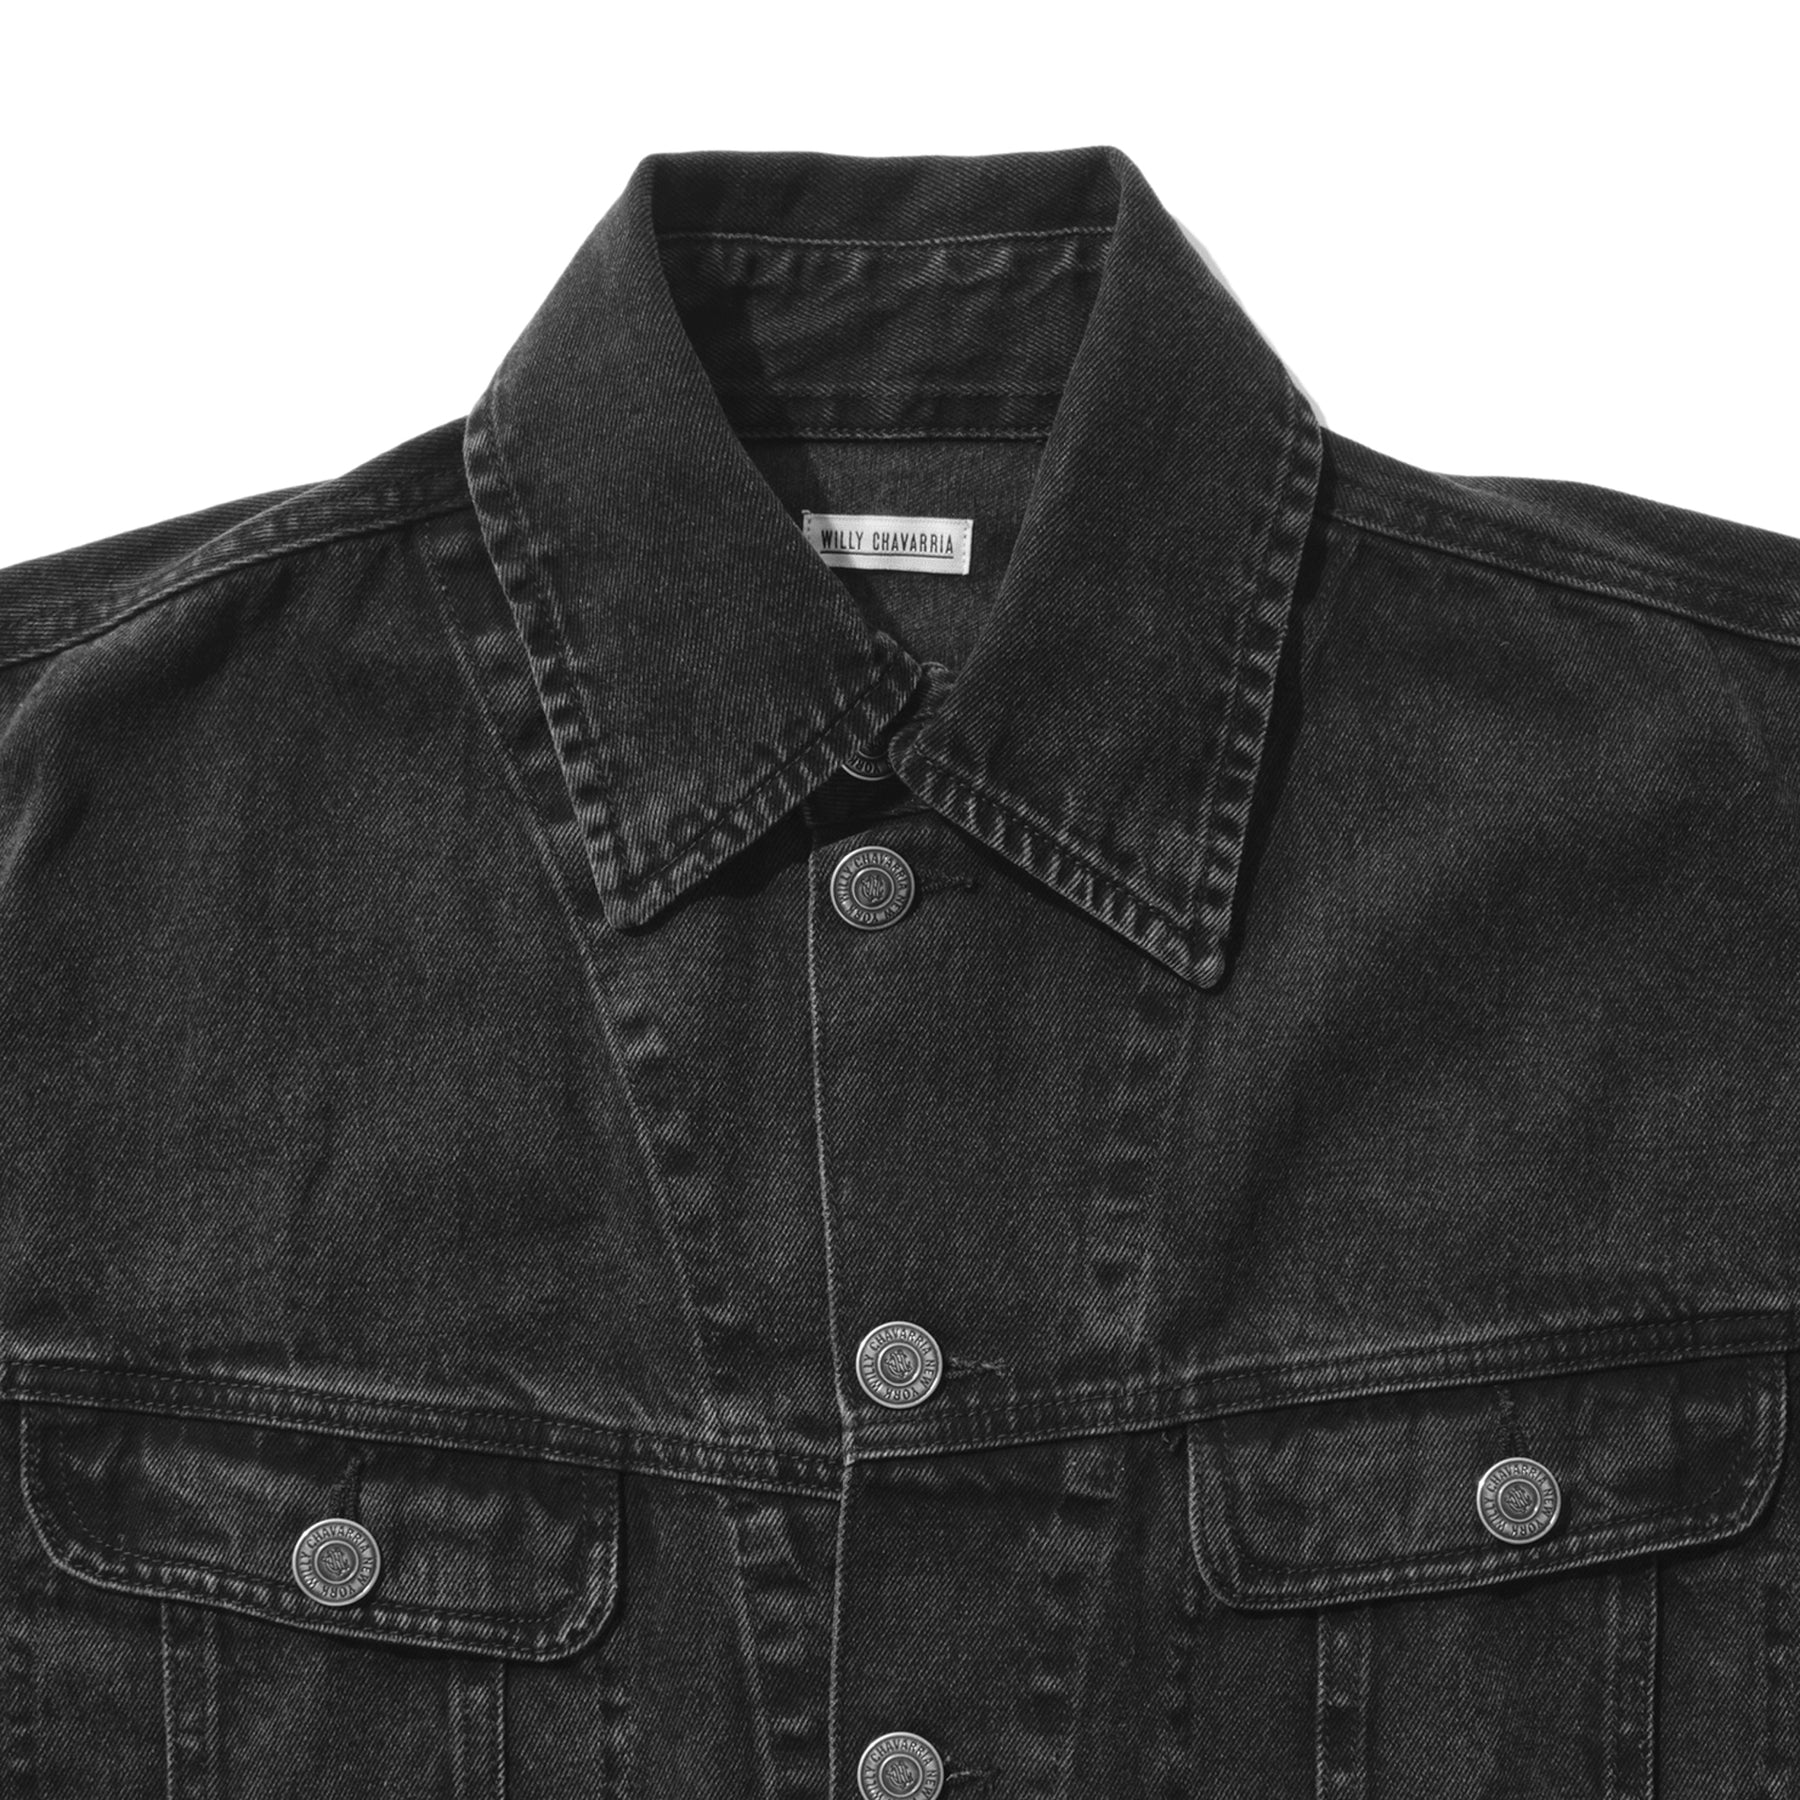 WILLY CHAVARRIA / CHACHI TRUCKER CIGARETTE POCKET JACKET WASHED BLACK